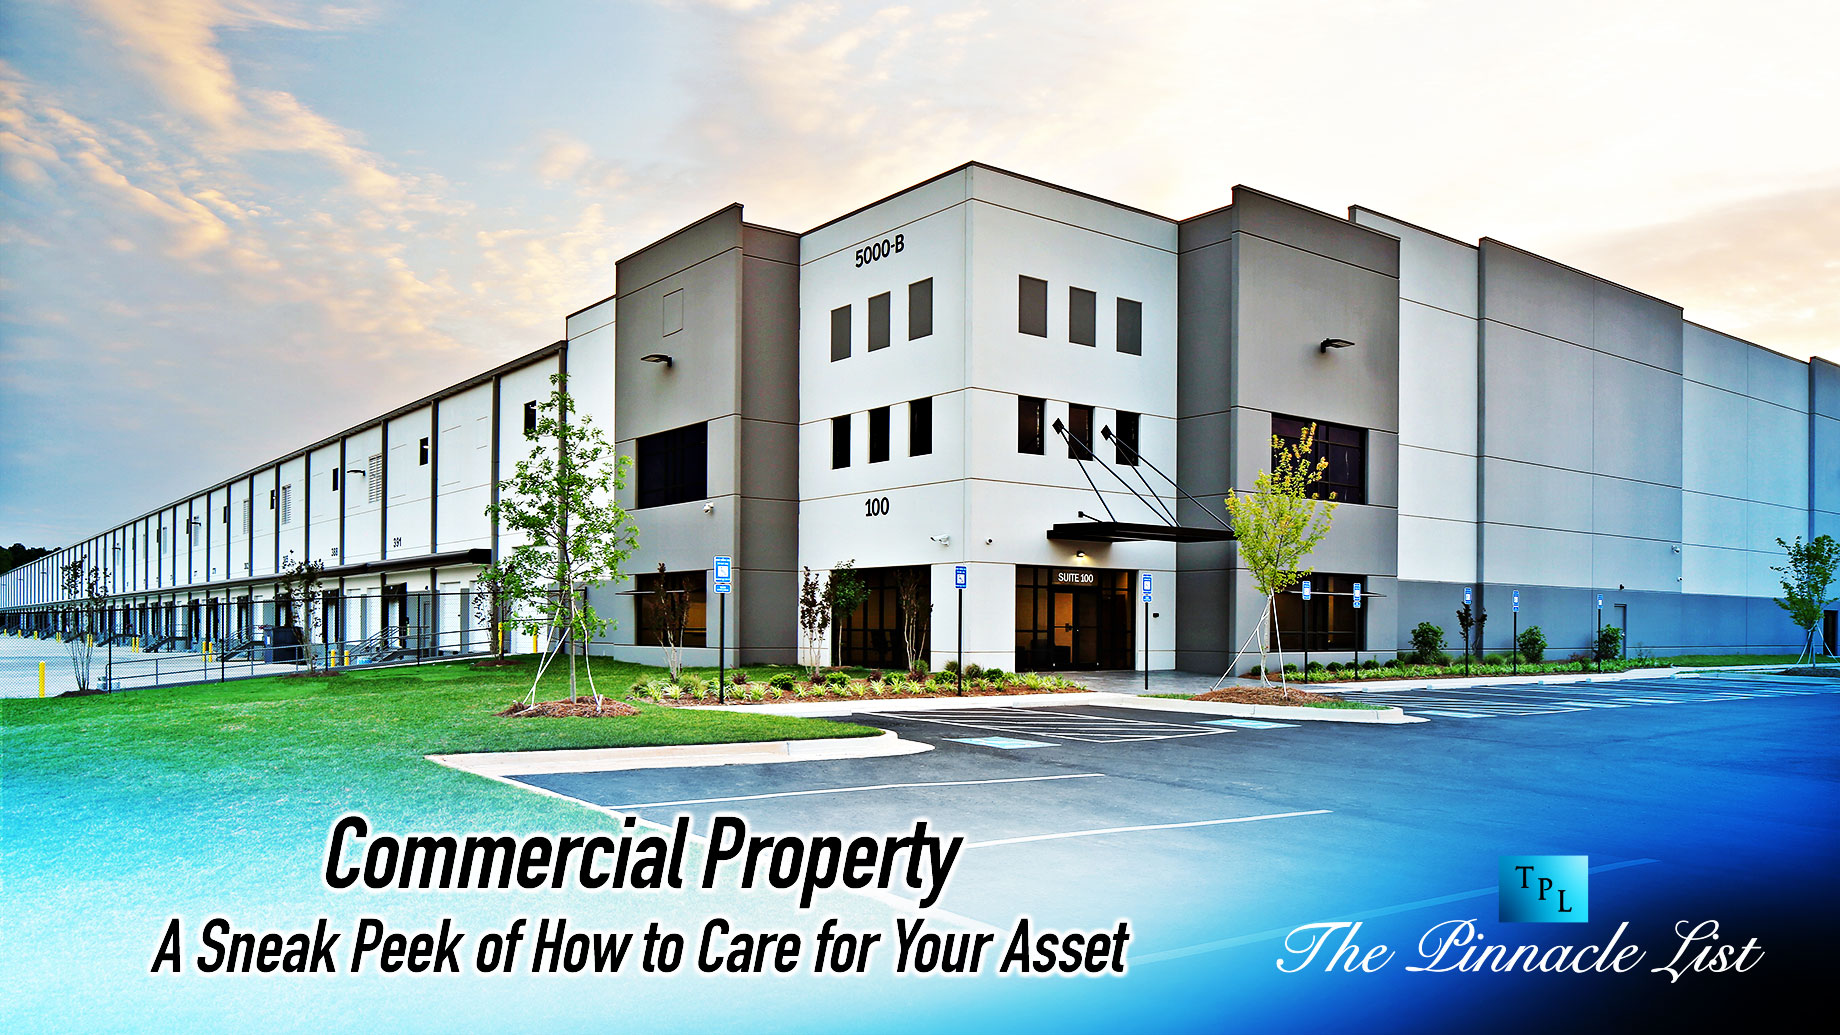 Commercial Property: A Sneak Peek of How to Care for Your Asset